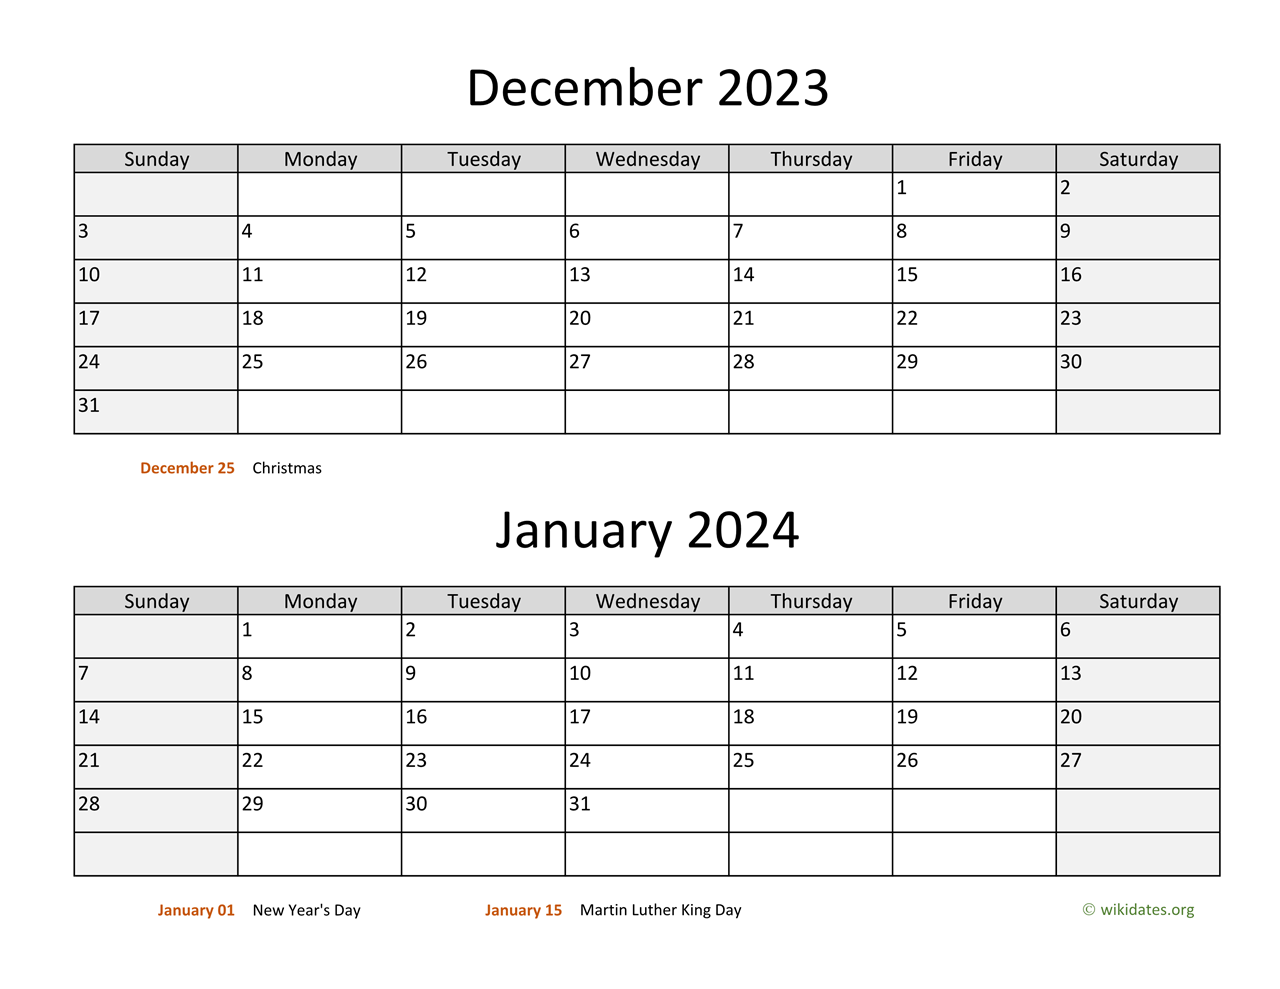 December 2023 And January 2024 Calendar | Wikidates for Free Printable Calendar December 2023 January 2024